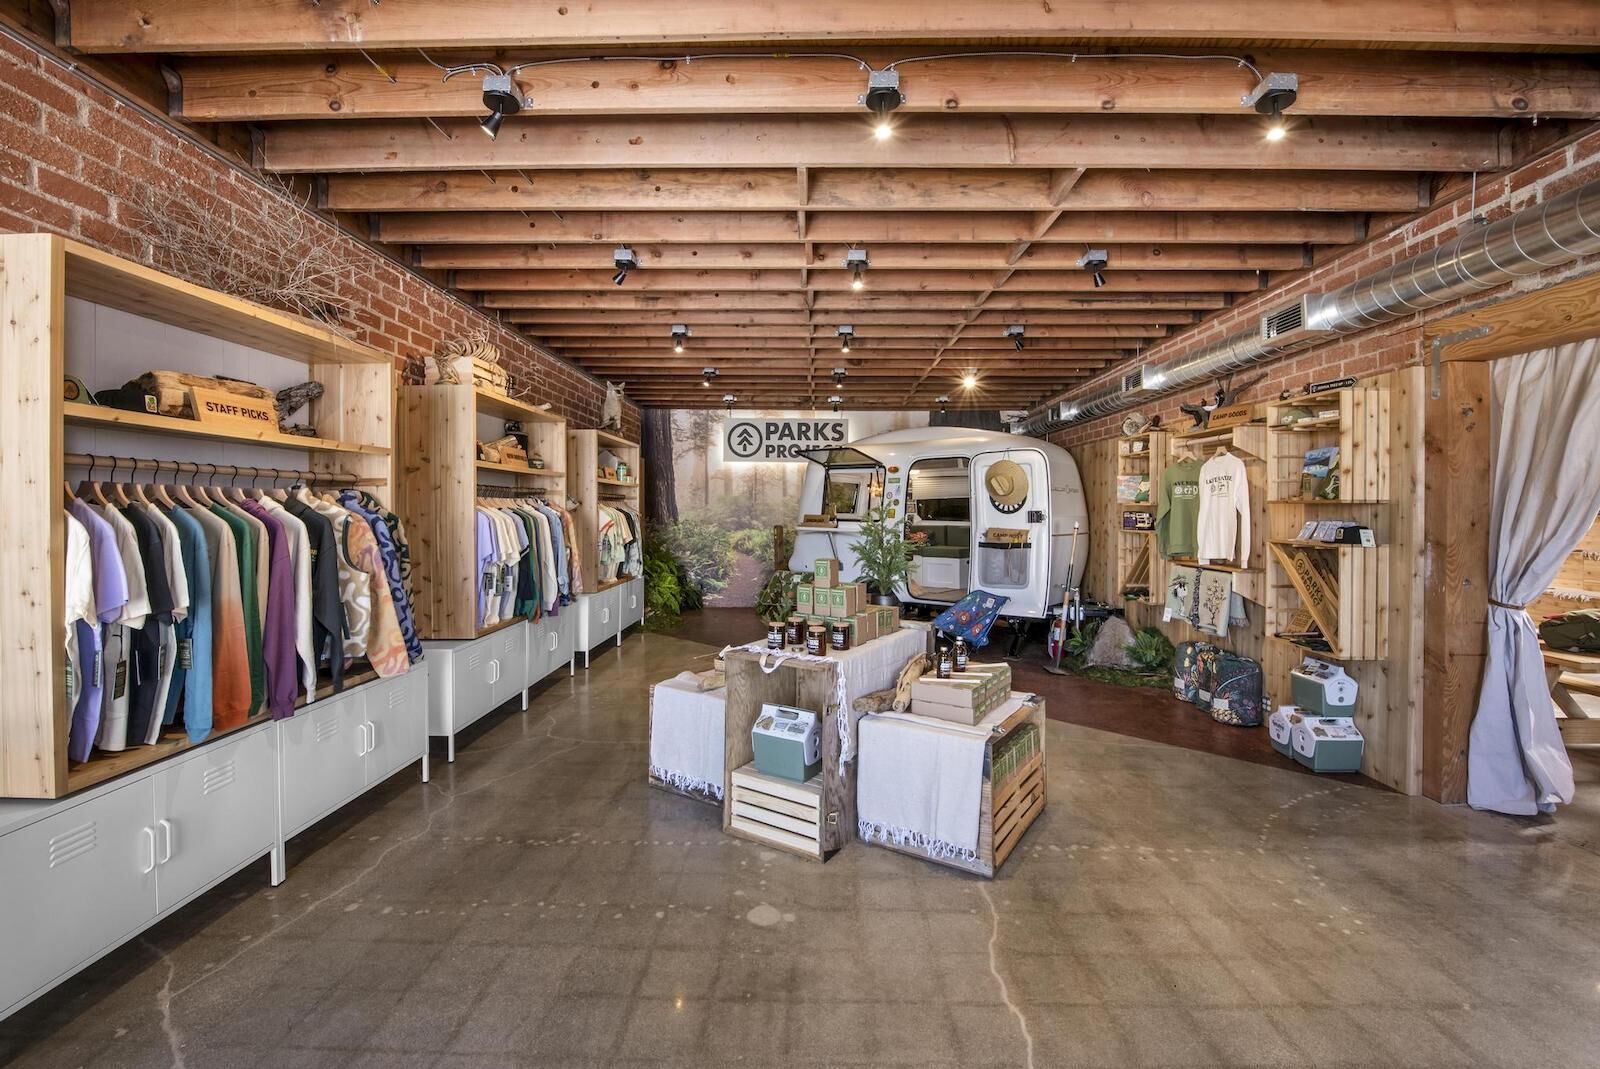 A New Los Angeles  Retail Shop Connects Shoppers to National Parks Conservation and Stewardship Projects